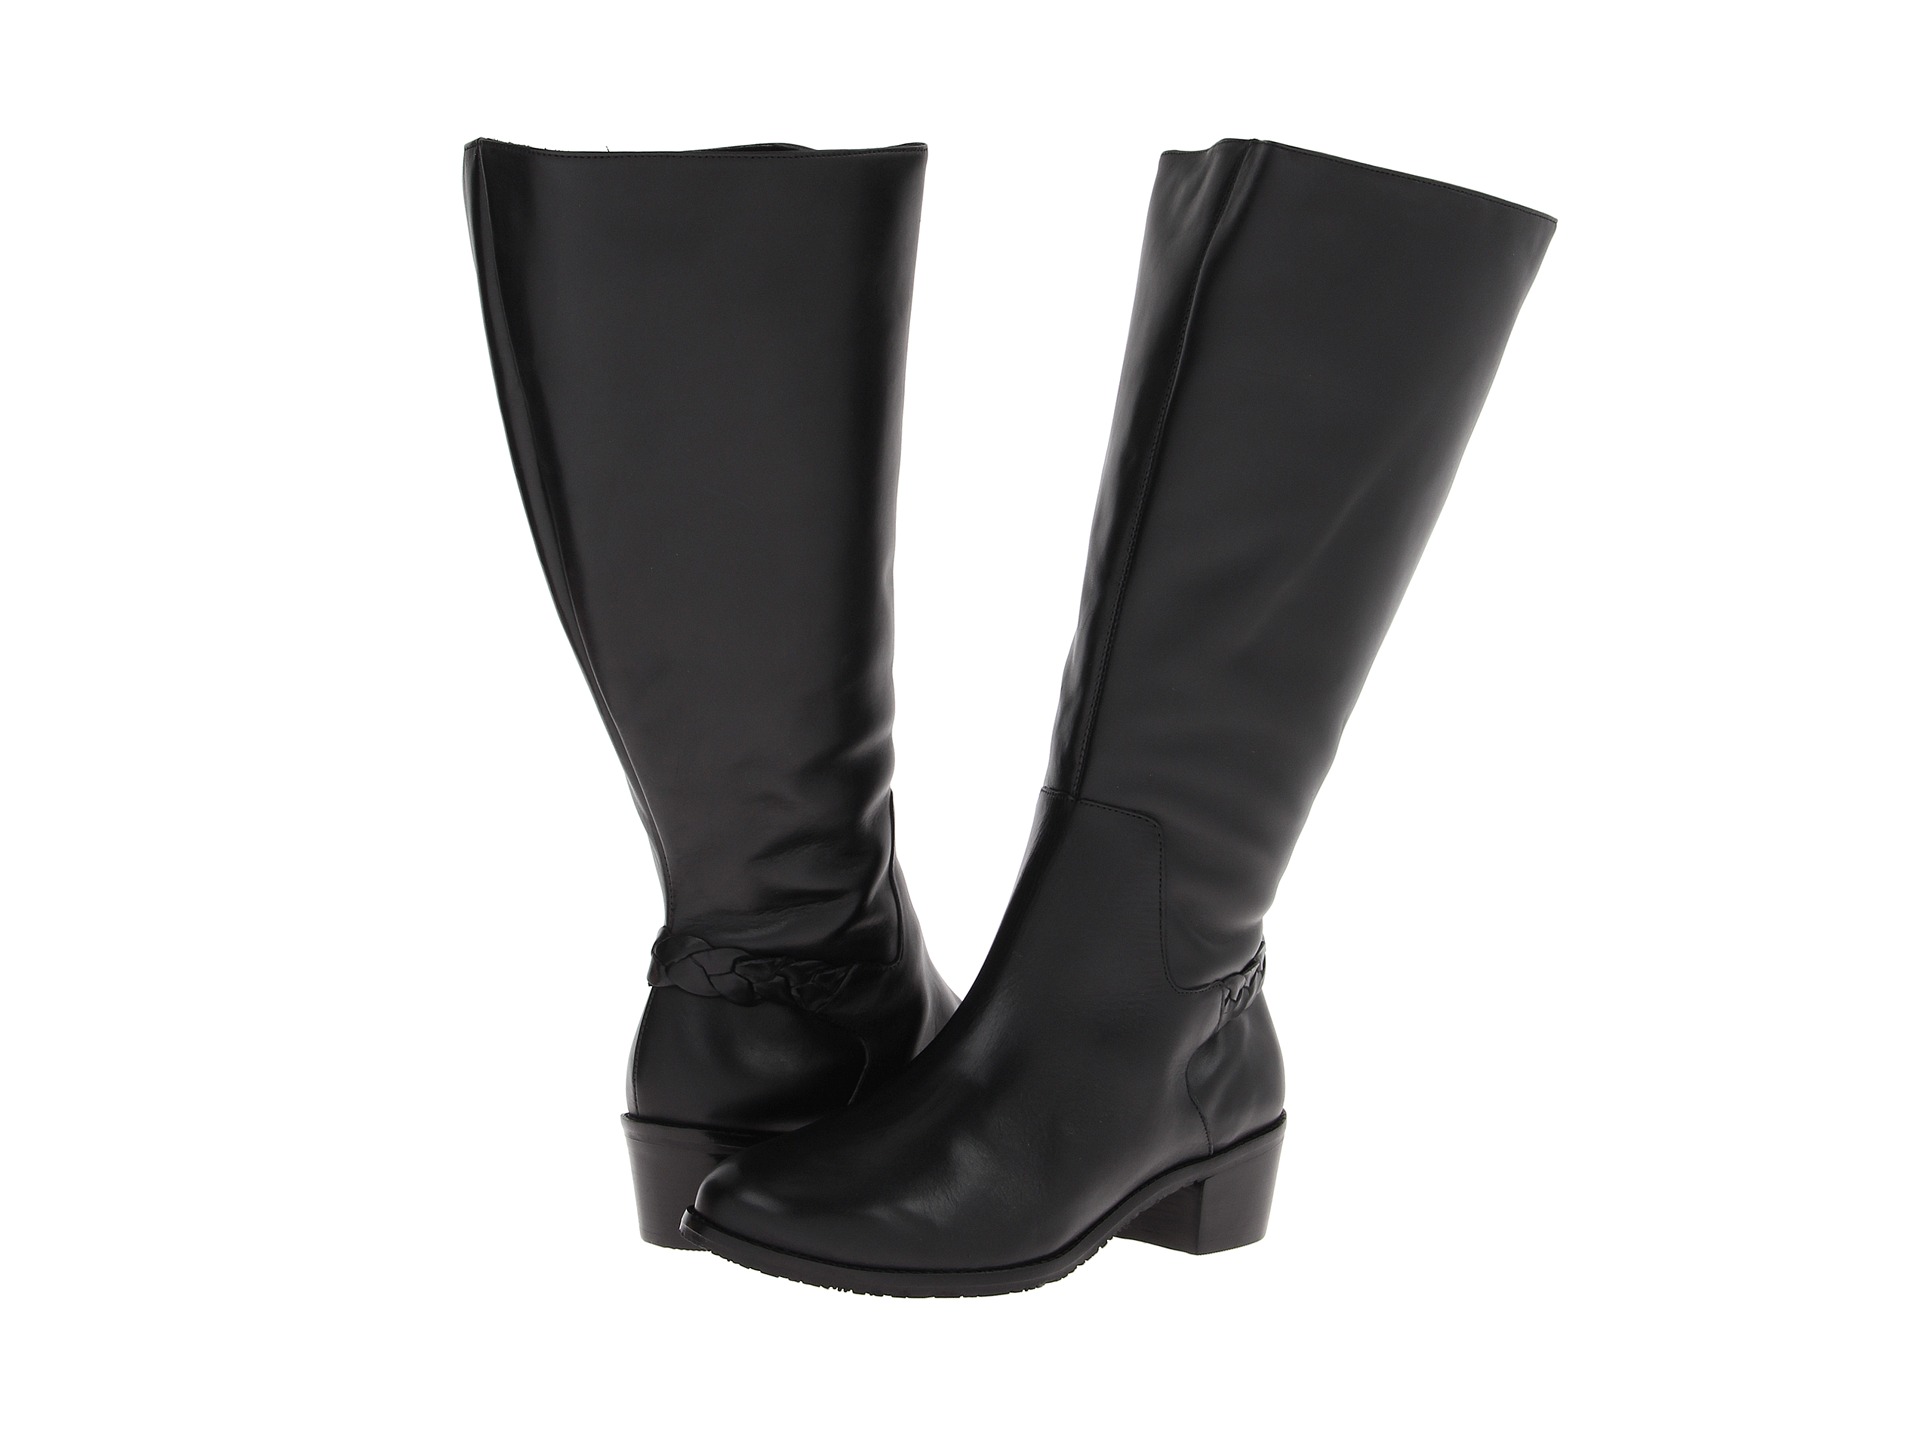 Rose Petals Women's Curly Wide Calf Leather Riding Boot Black - $125.99 ...